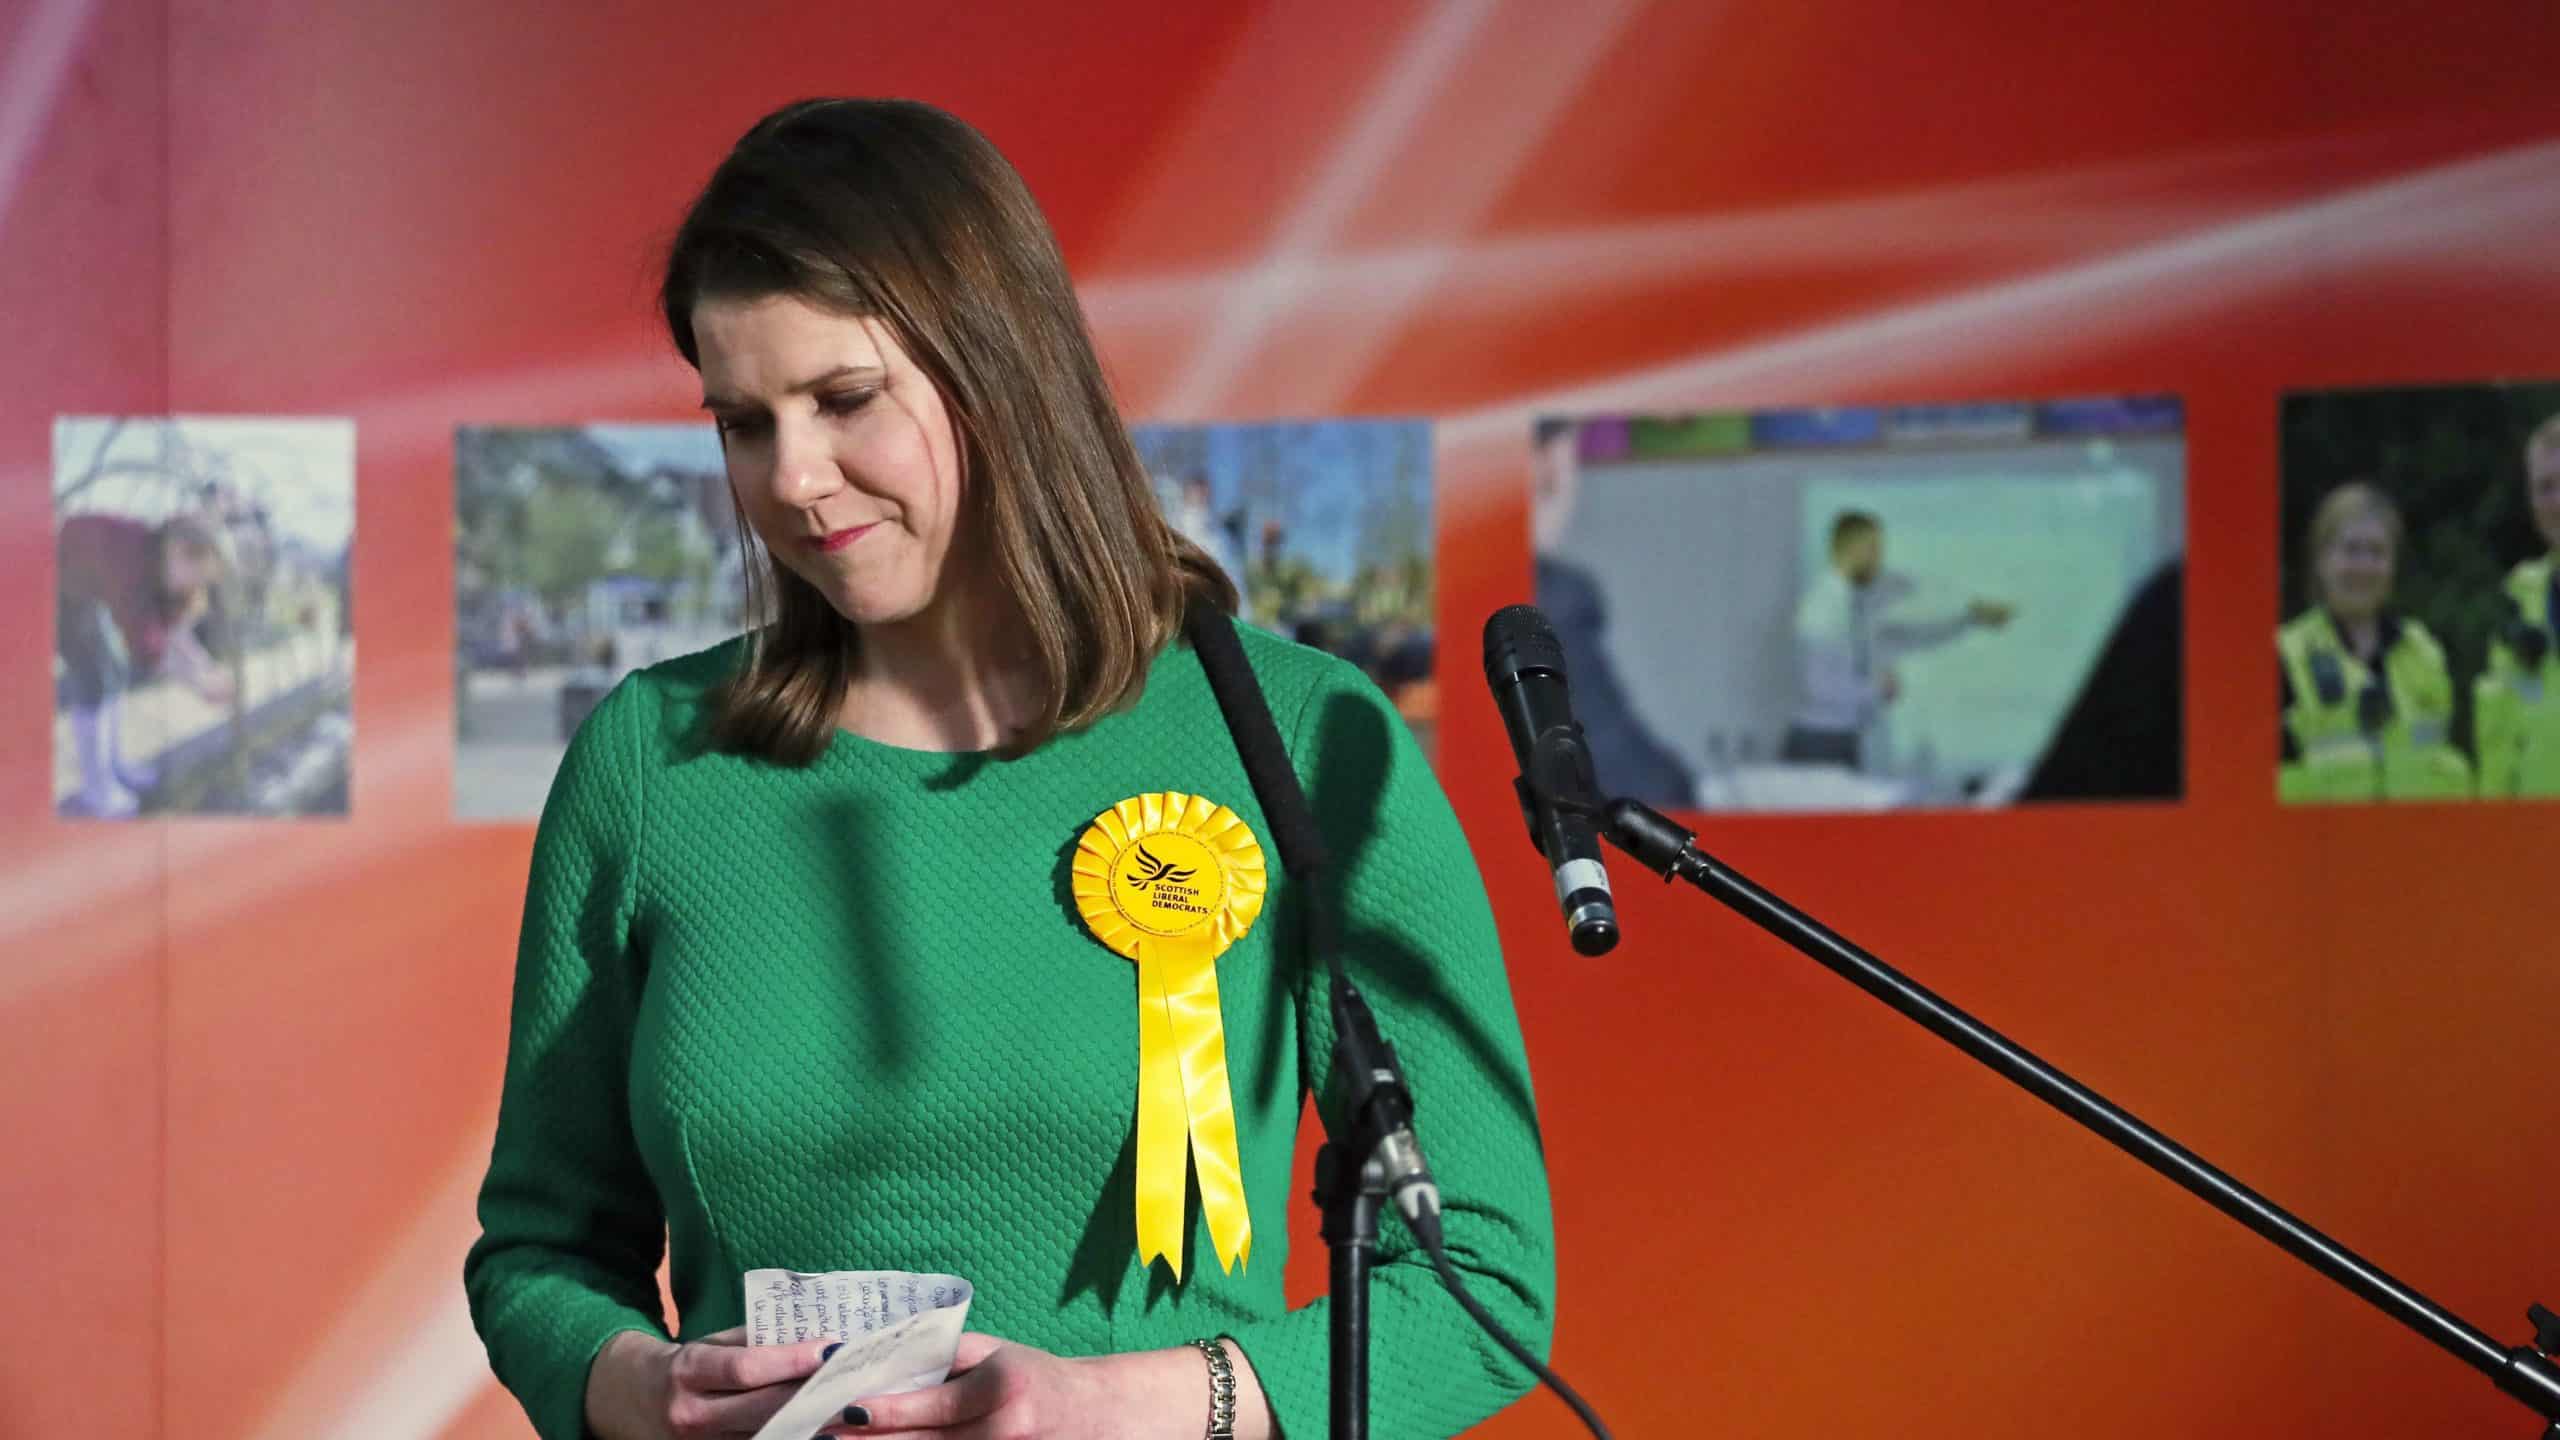 New analysis suggests Labour did not lose the red wall to the Tories – the Lib Dems did